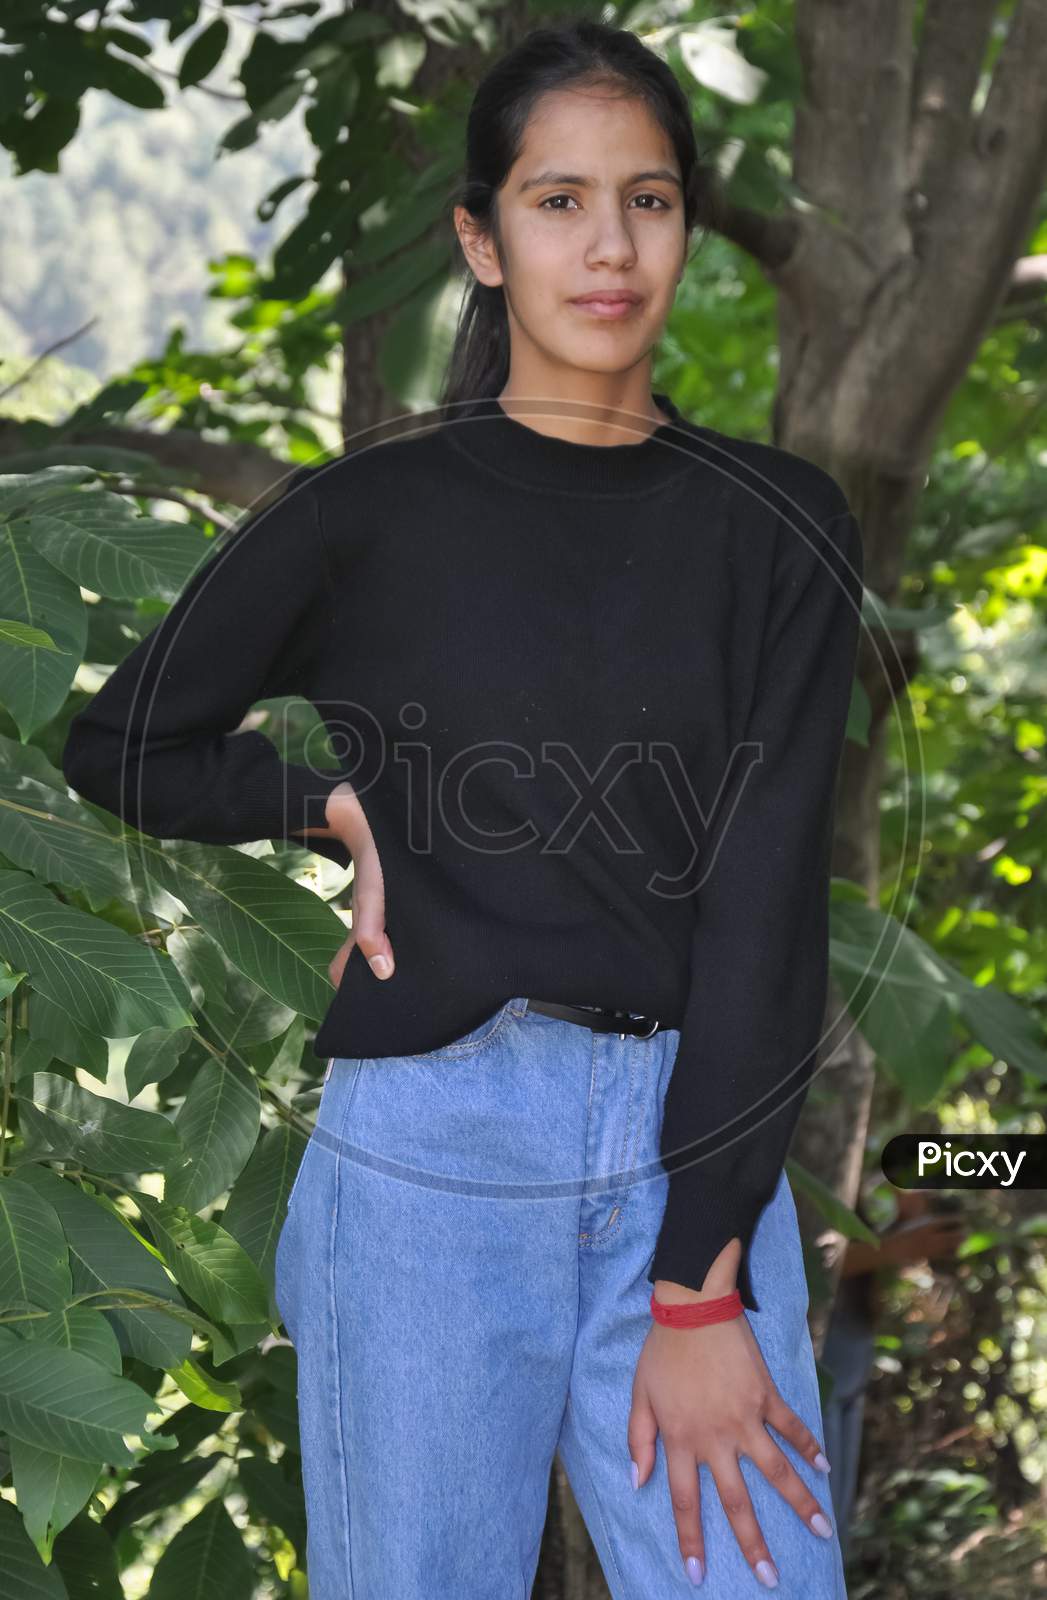 Portrait of a charming young girl standing outside and wearing black sweatshirt and light blue jean and posing with her hand on hips and looking at camera